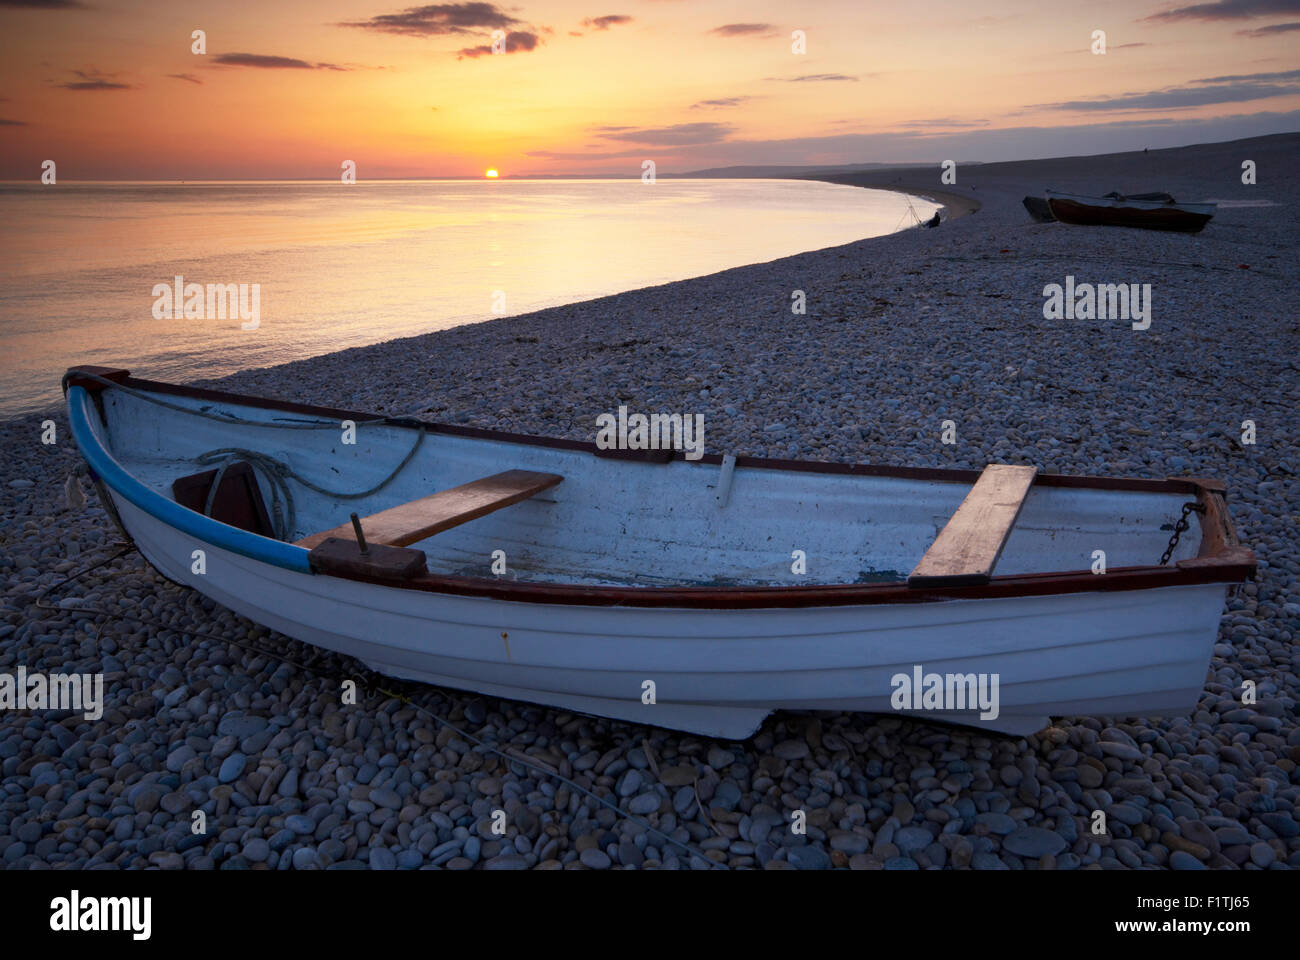 Boat on the beach at Chesil Cove during sunset, Chiswell, Portland on Dorset's Jurassic Coast, England, UK. Stock Photo